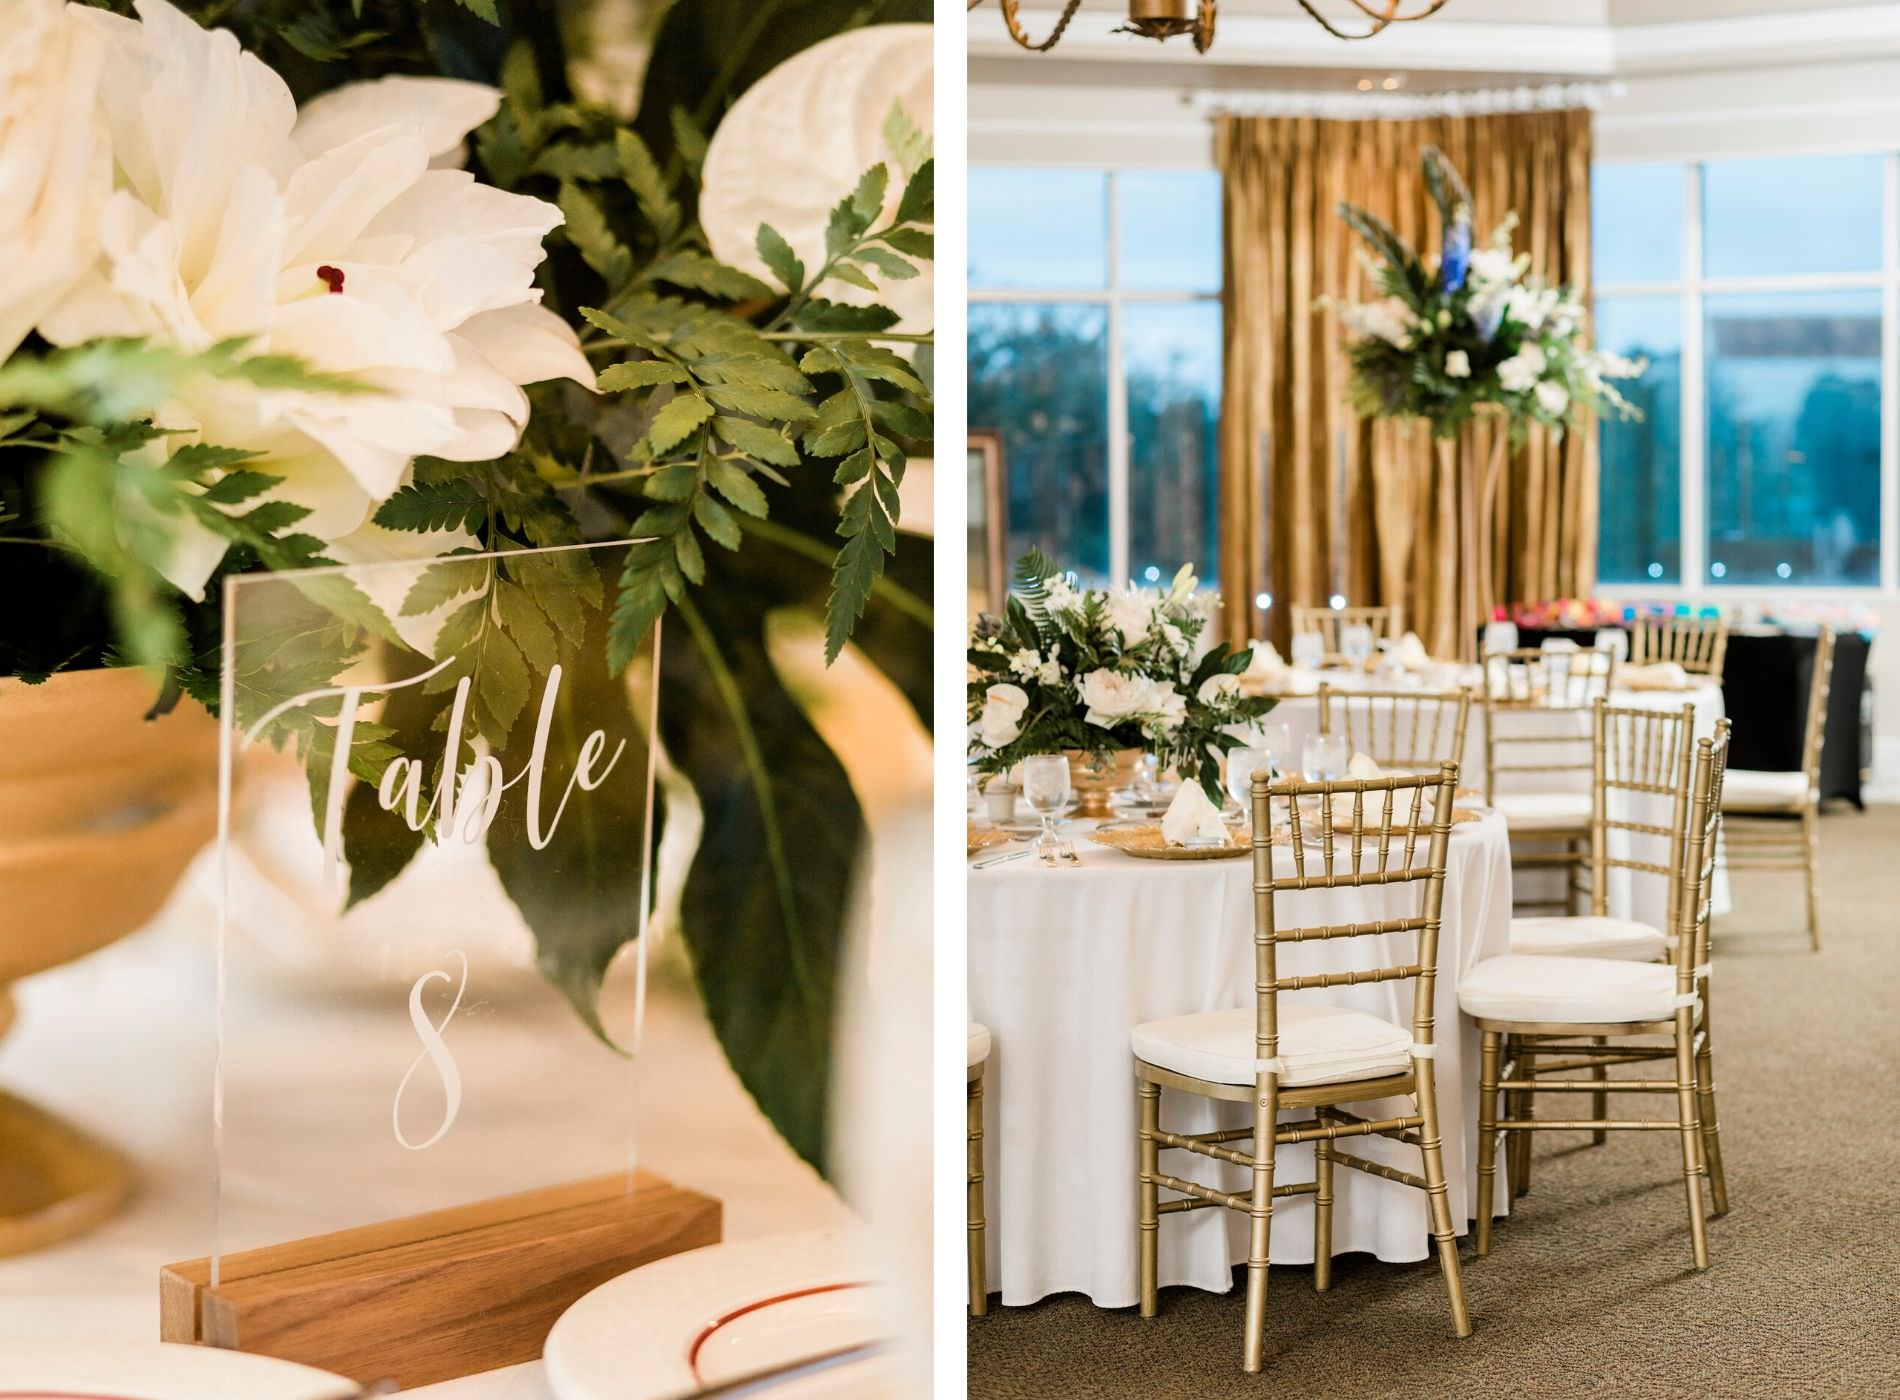 St. Pete Wedding Venue Isla Del Sol | Indoor Ballroom Reception with Gold Chiavari Chairs, Clear Acrylic Calligraphy Table Numbers and Tropical Greenery Centerpieces